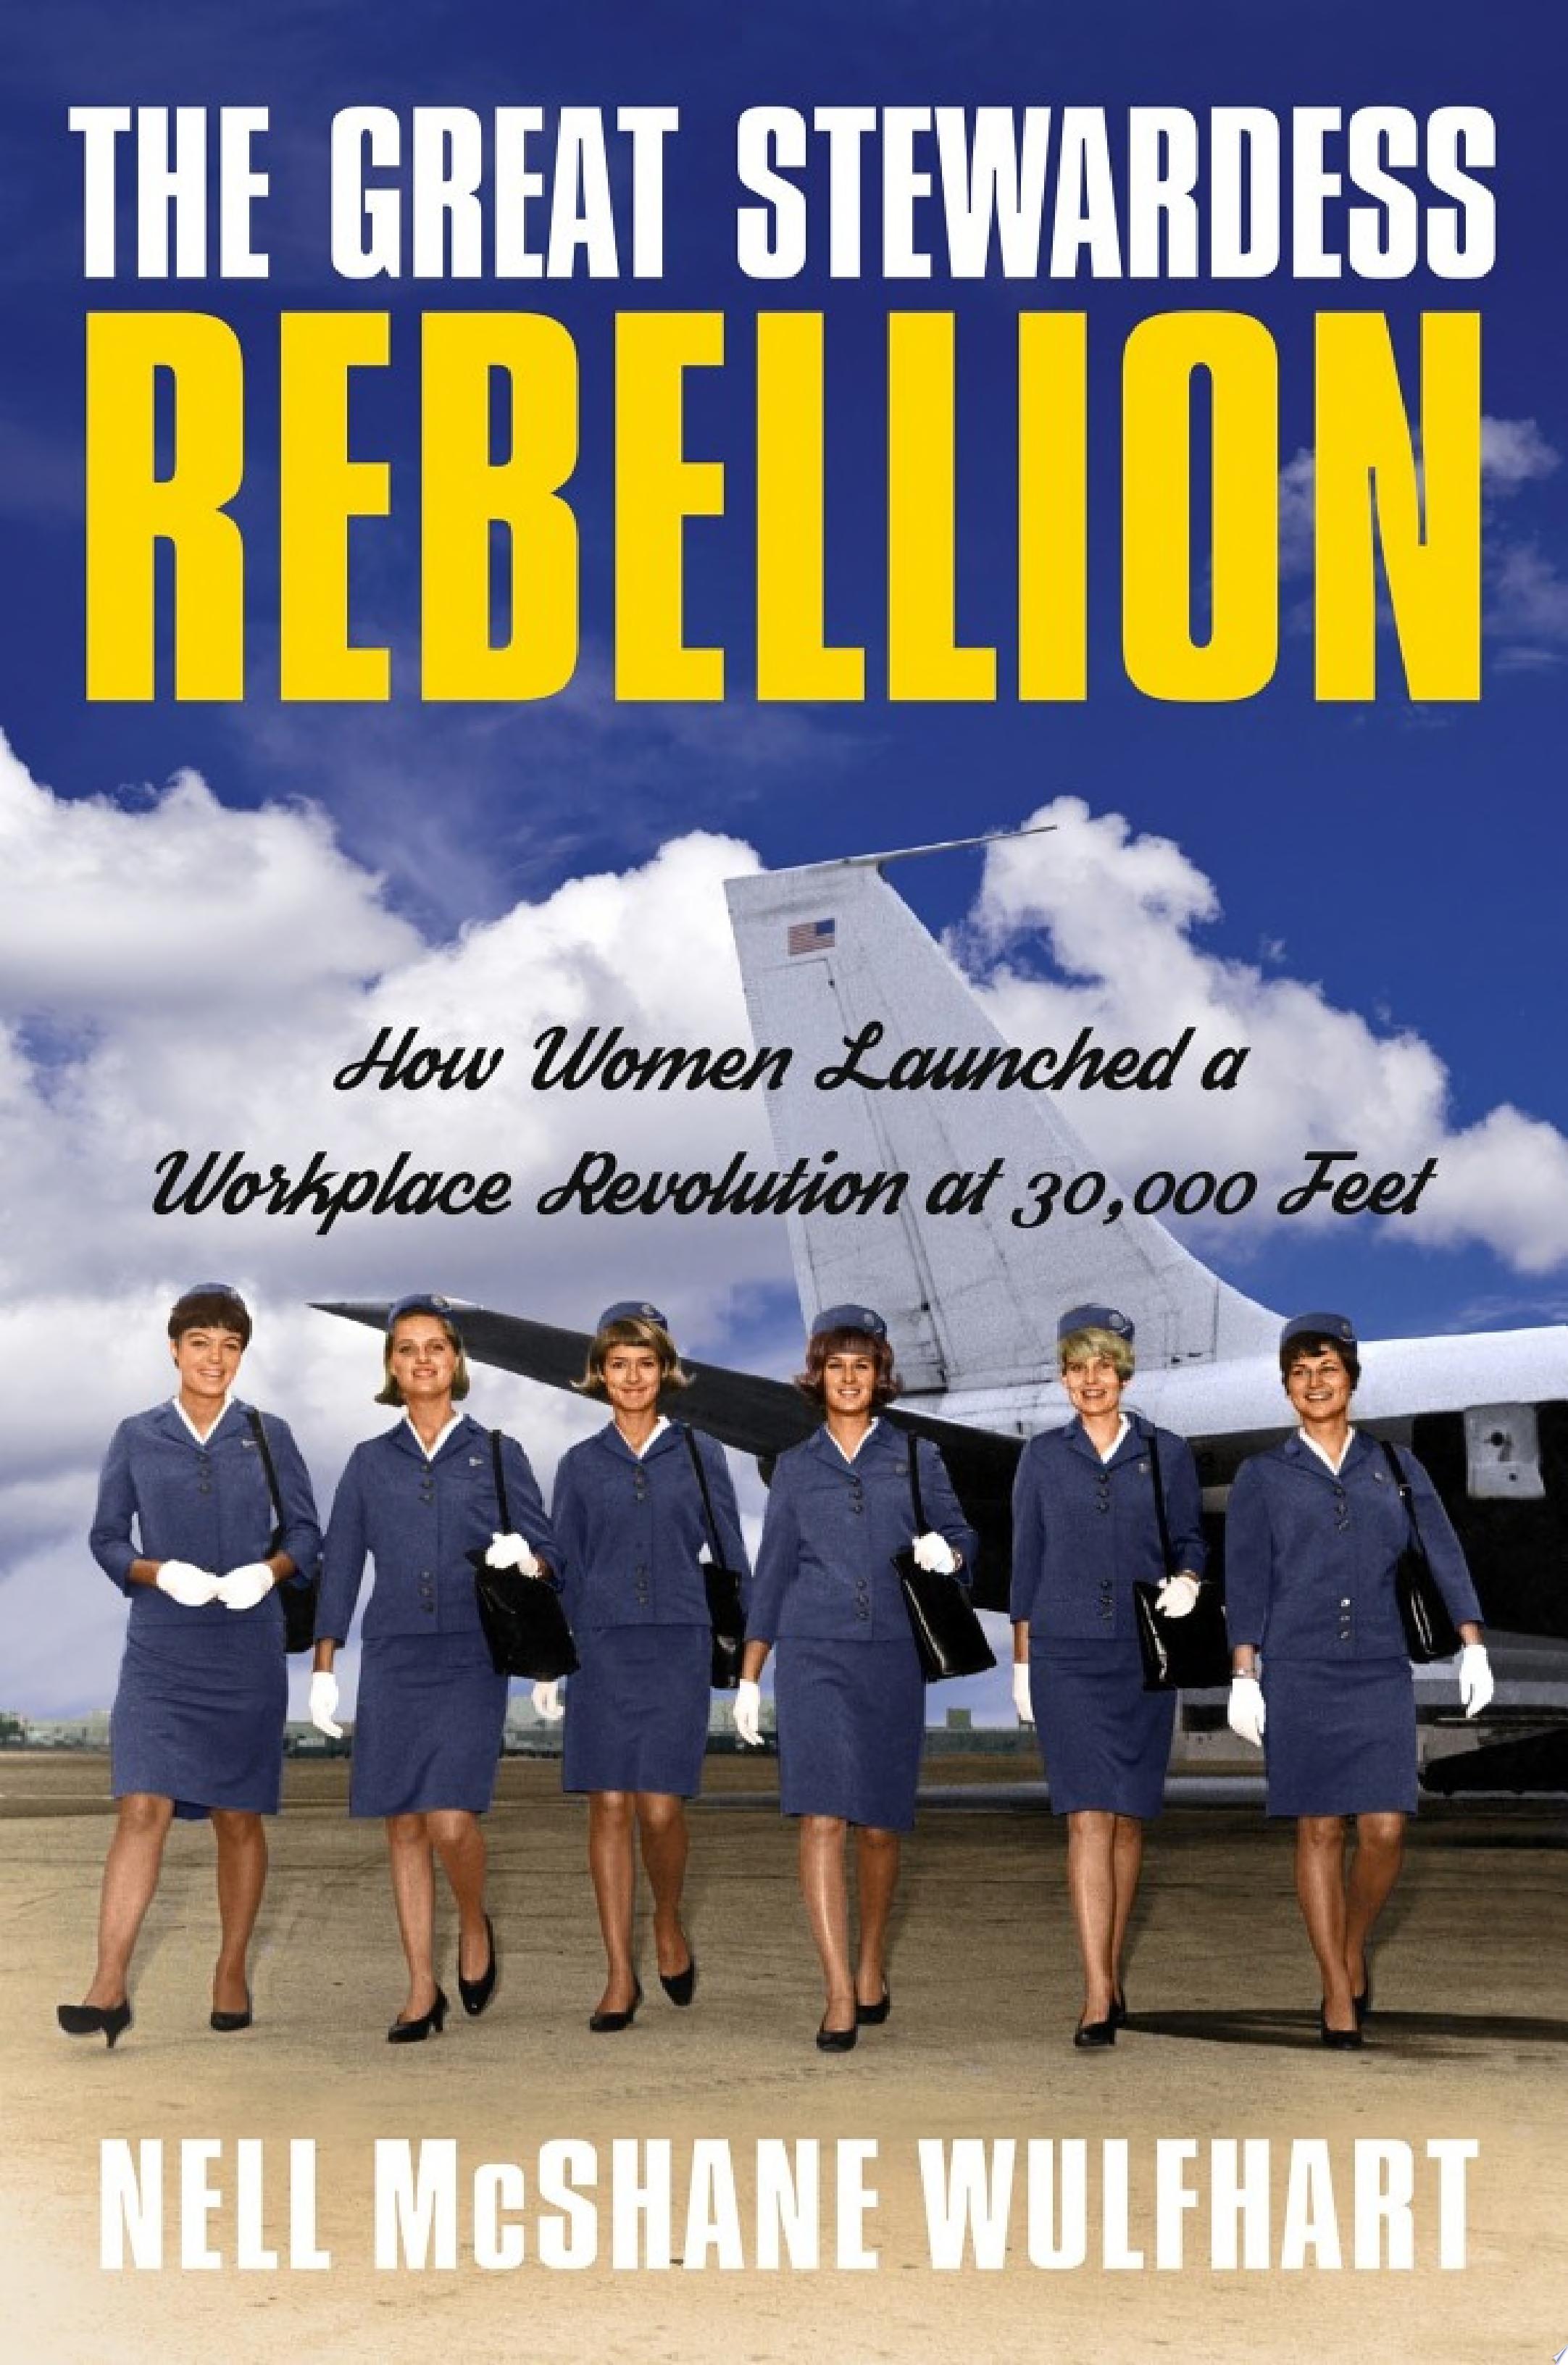 Image for "The Great Stewardess Rebellion"